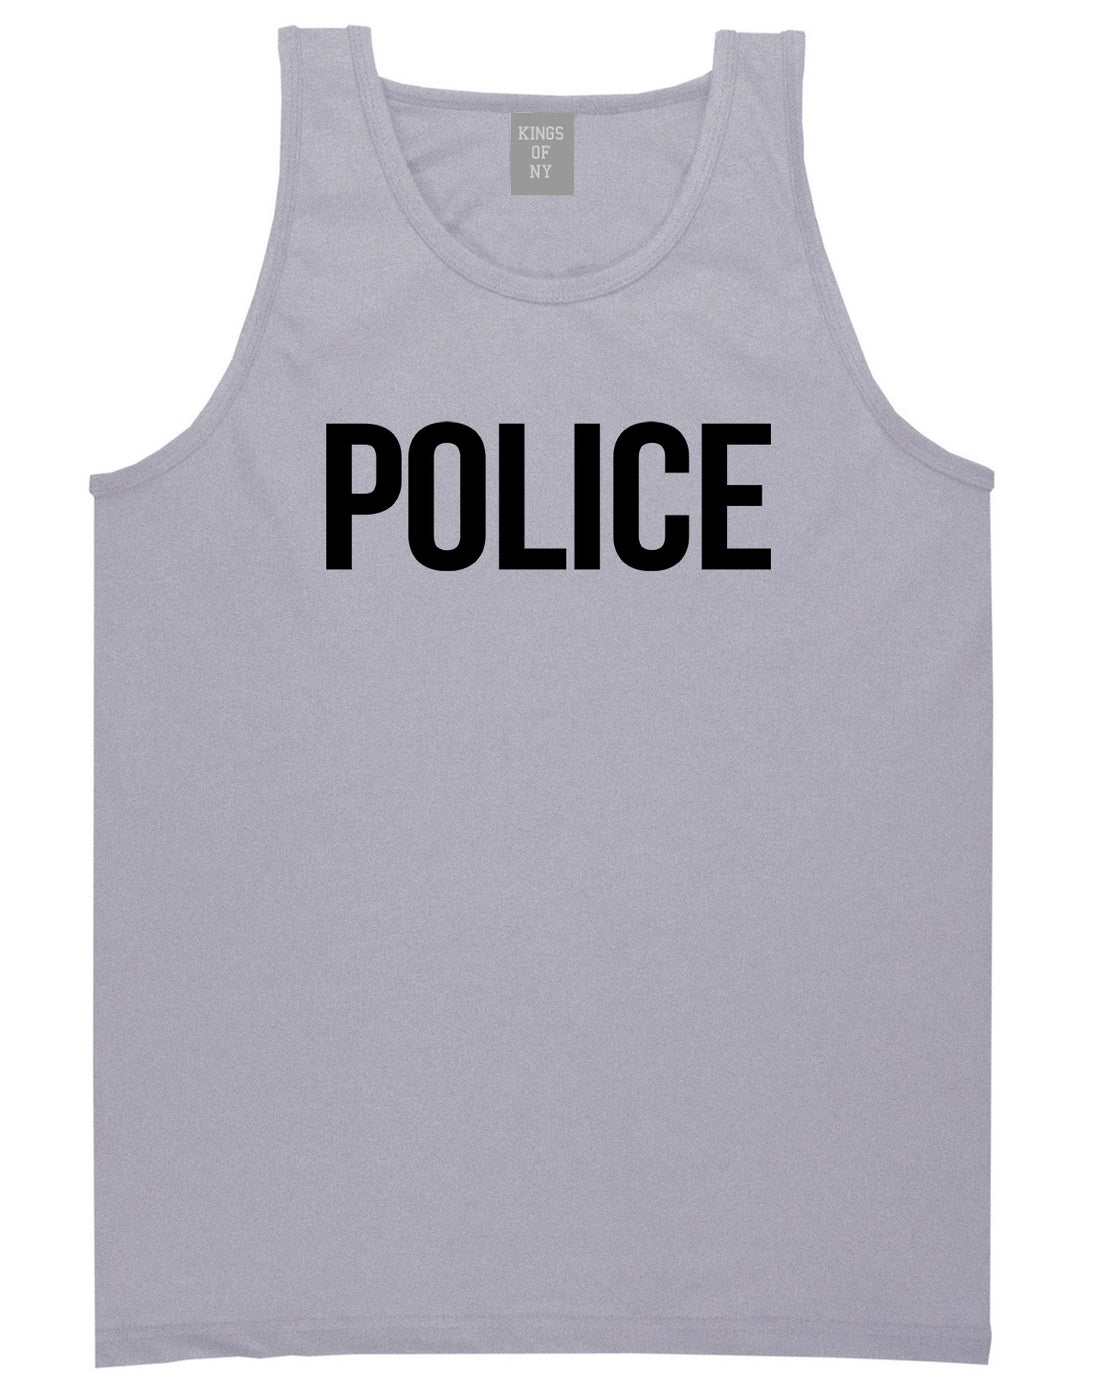 Police Uniform Cop Costume Mens Tank Top Shirt Grey by Kings Of NY